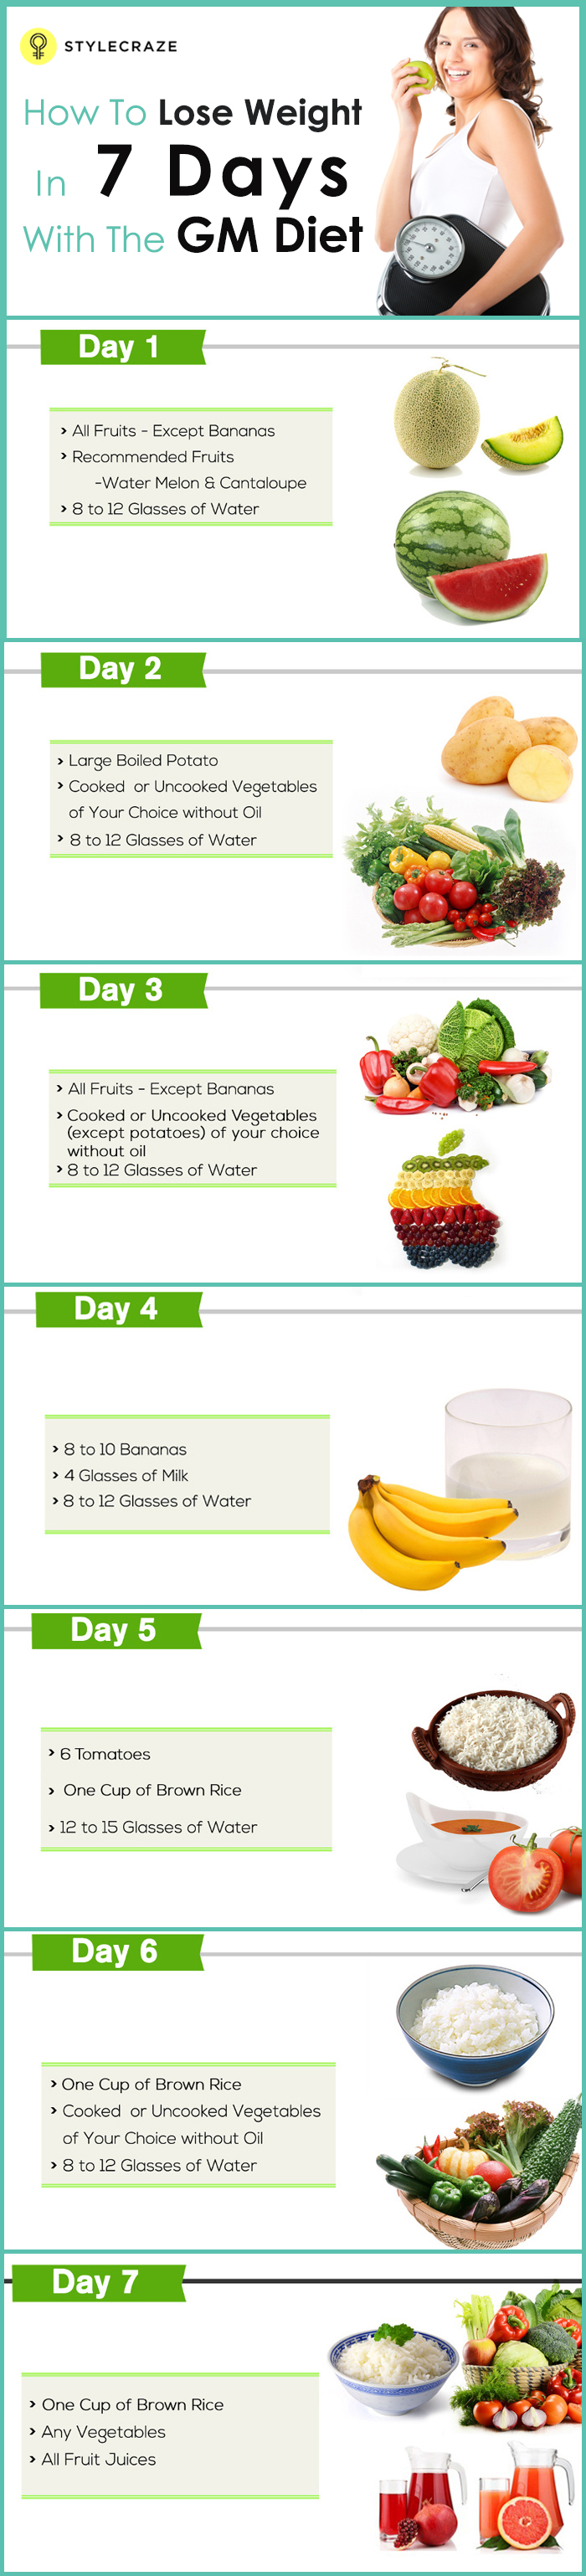 gm-diet-plan-7-day-meal-plan-for-fast-weight-loss-benefits-risks